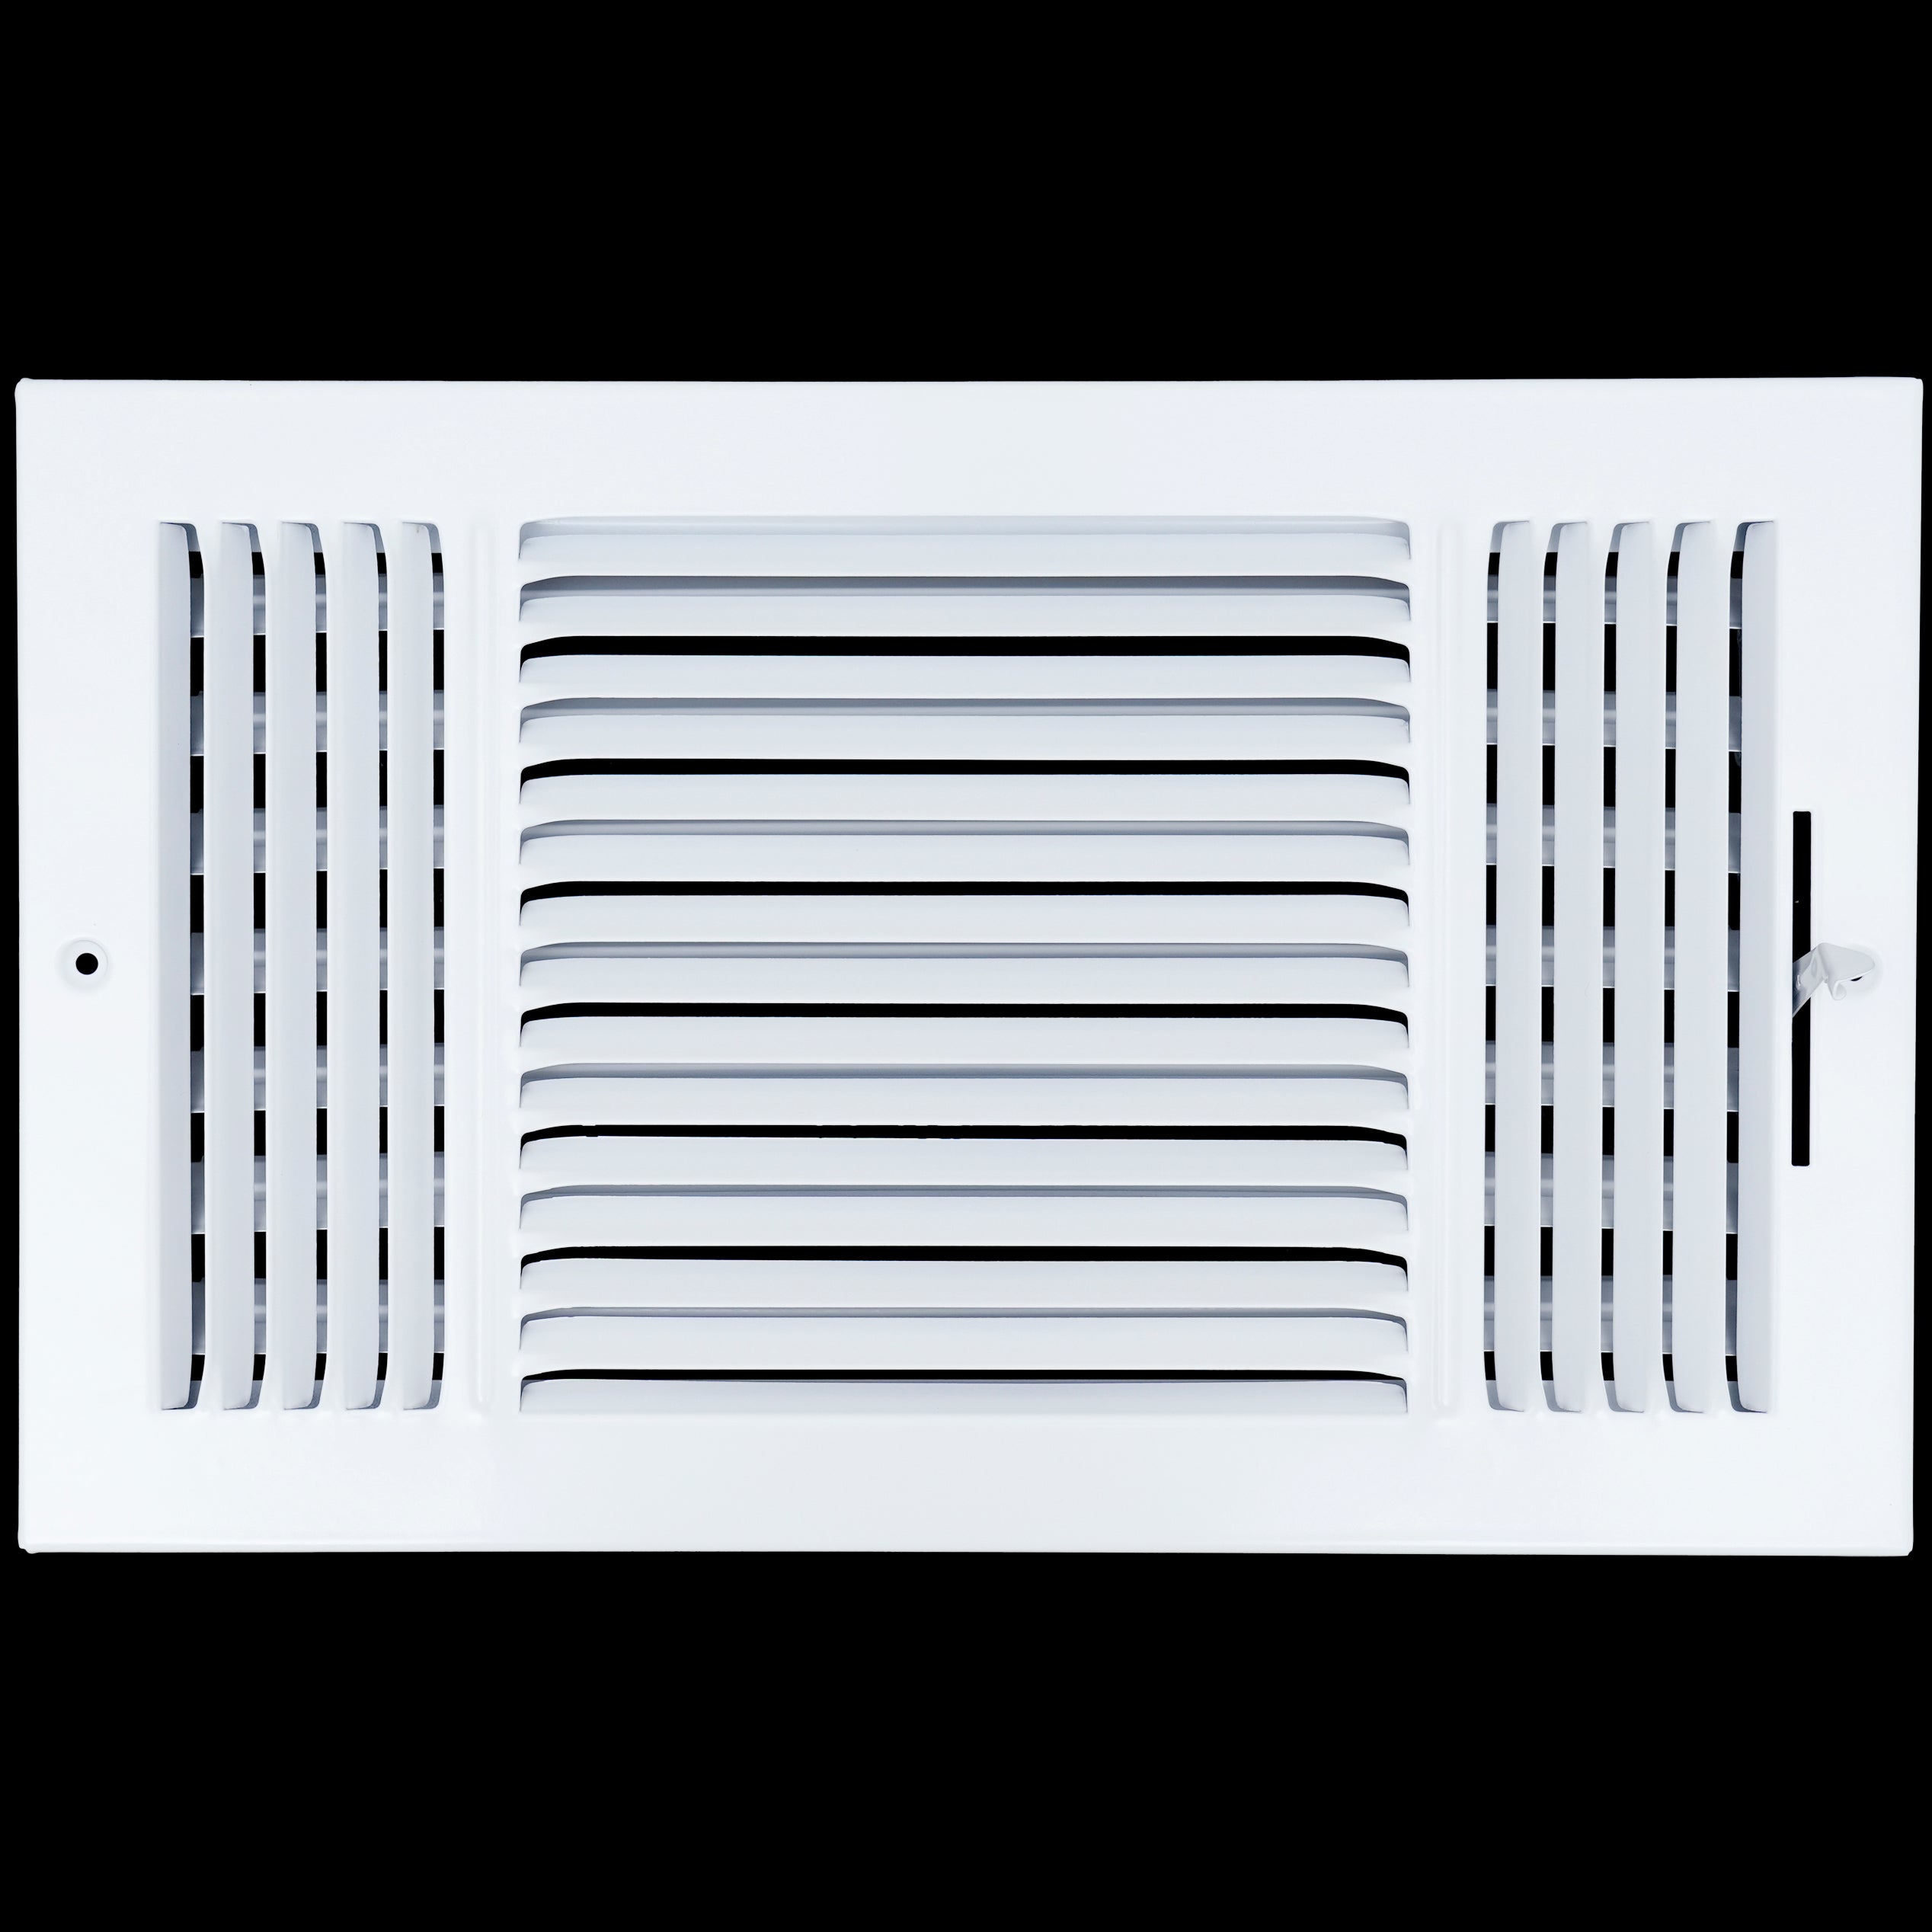 airgrilles 14 x 8 duct opening  -  3 way steel air supply diffuser for sidewall and ceiling hnd-asg-wh-3way-14x8 764613097566 - 1